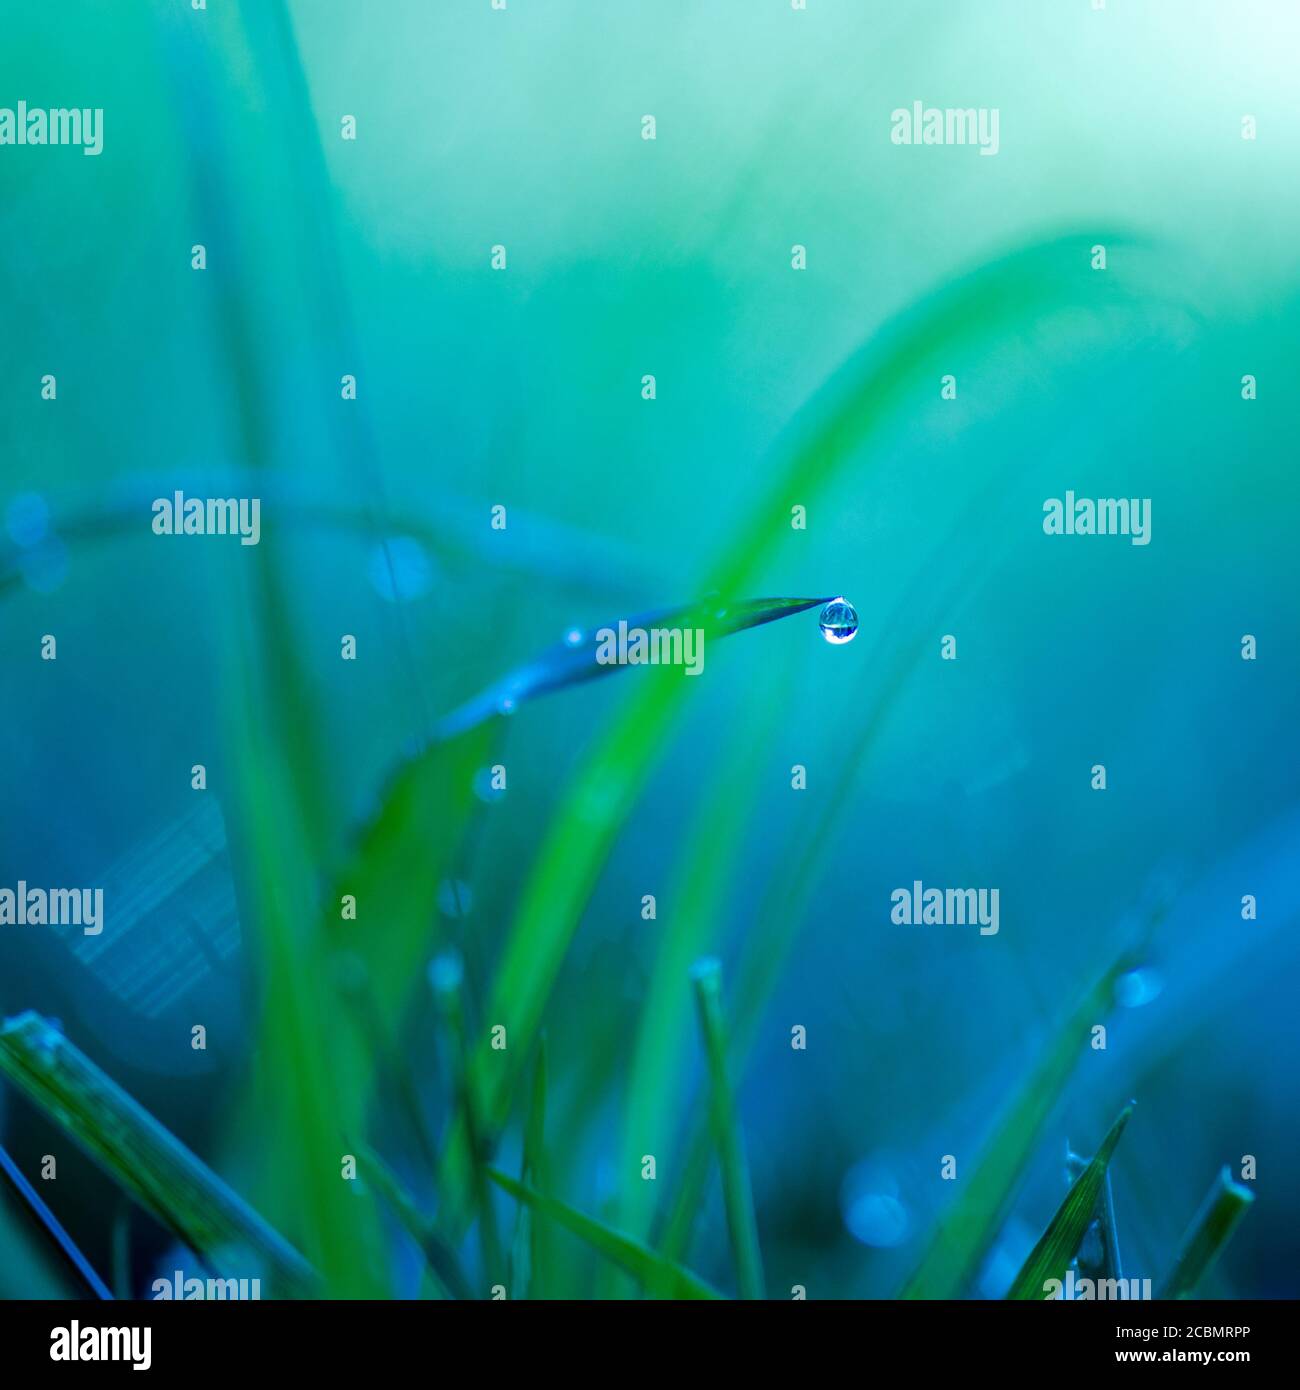 Abstract dew drops on grass Stock Photo - Alamy